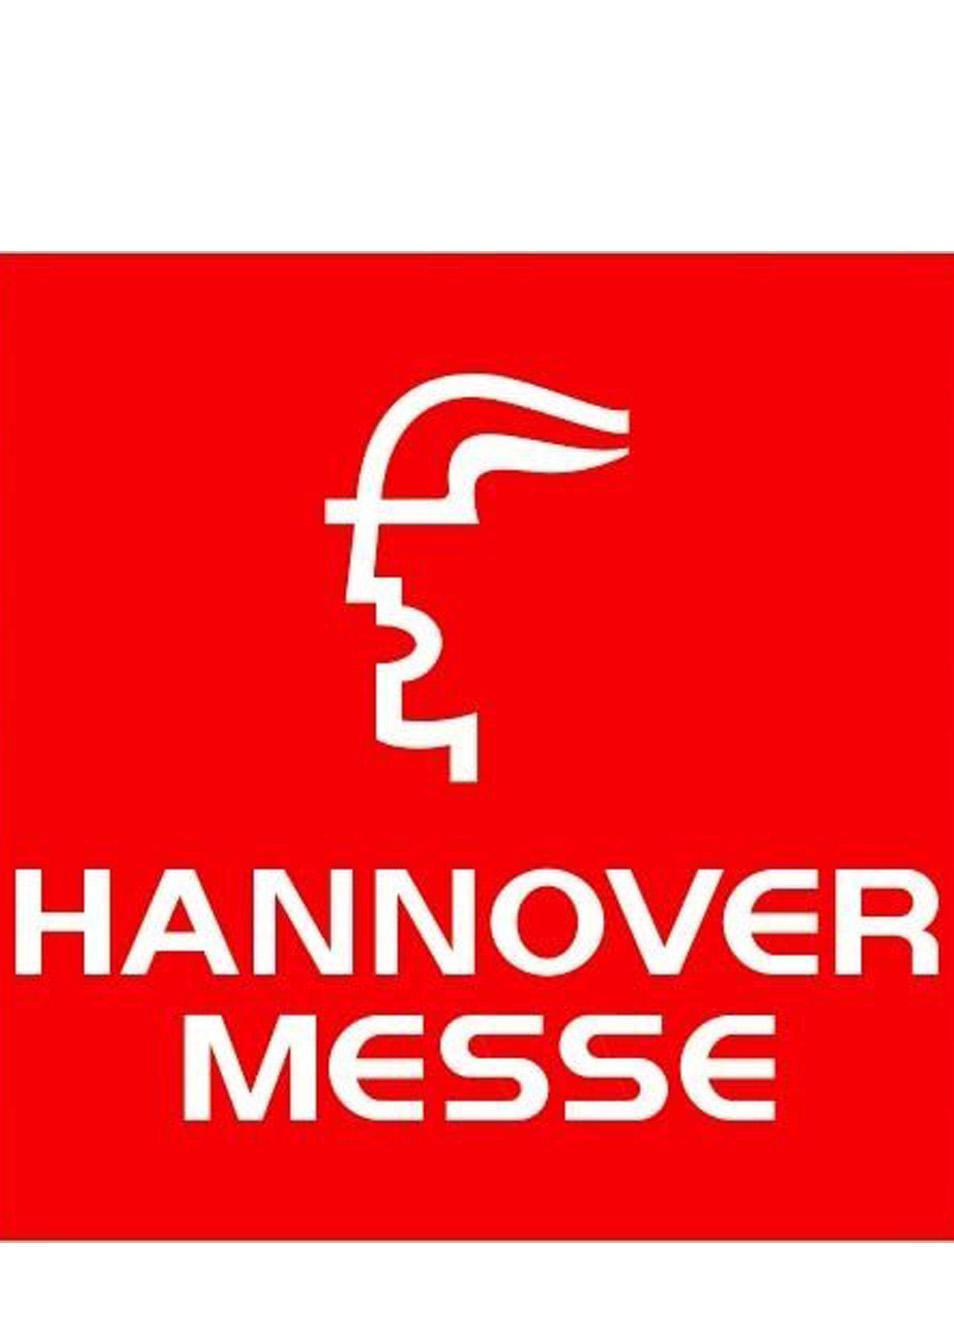 GGB participa do Hannover Messe Industrial Show 2019